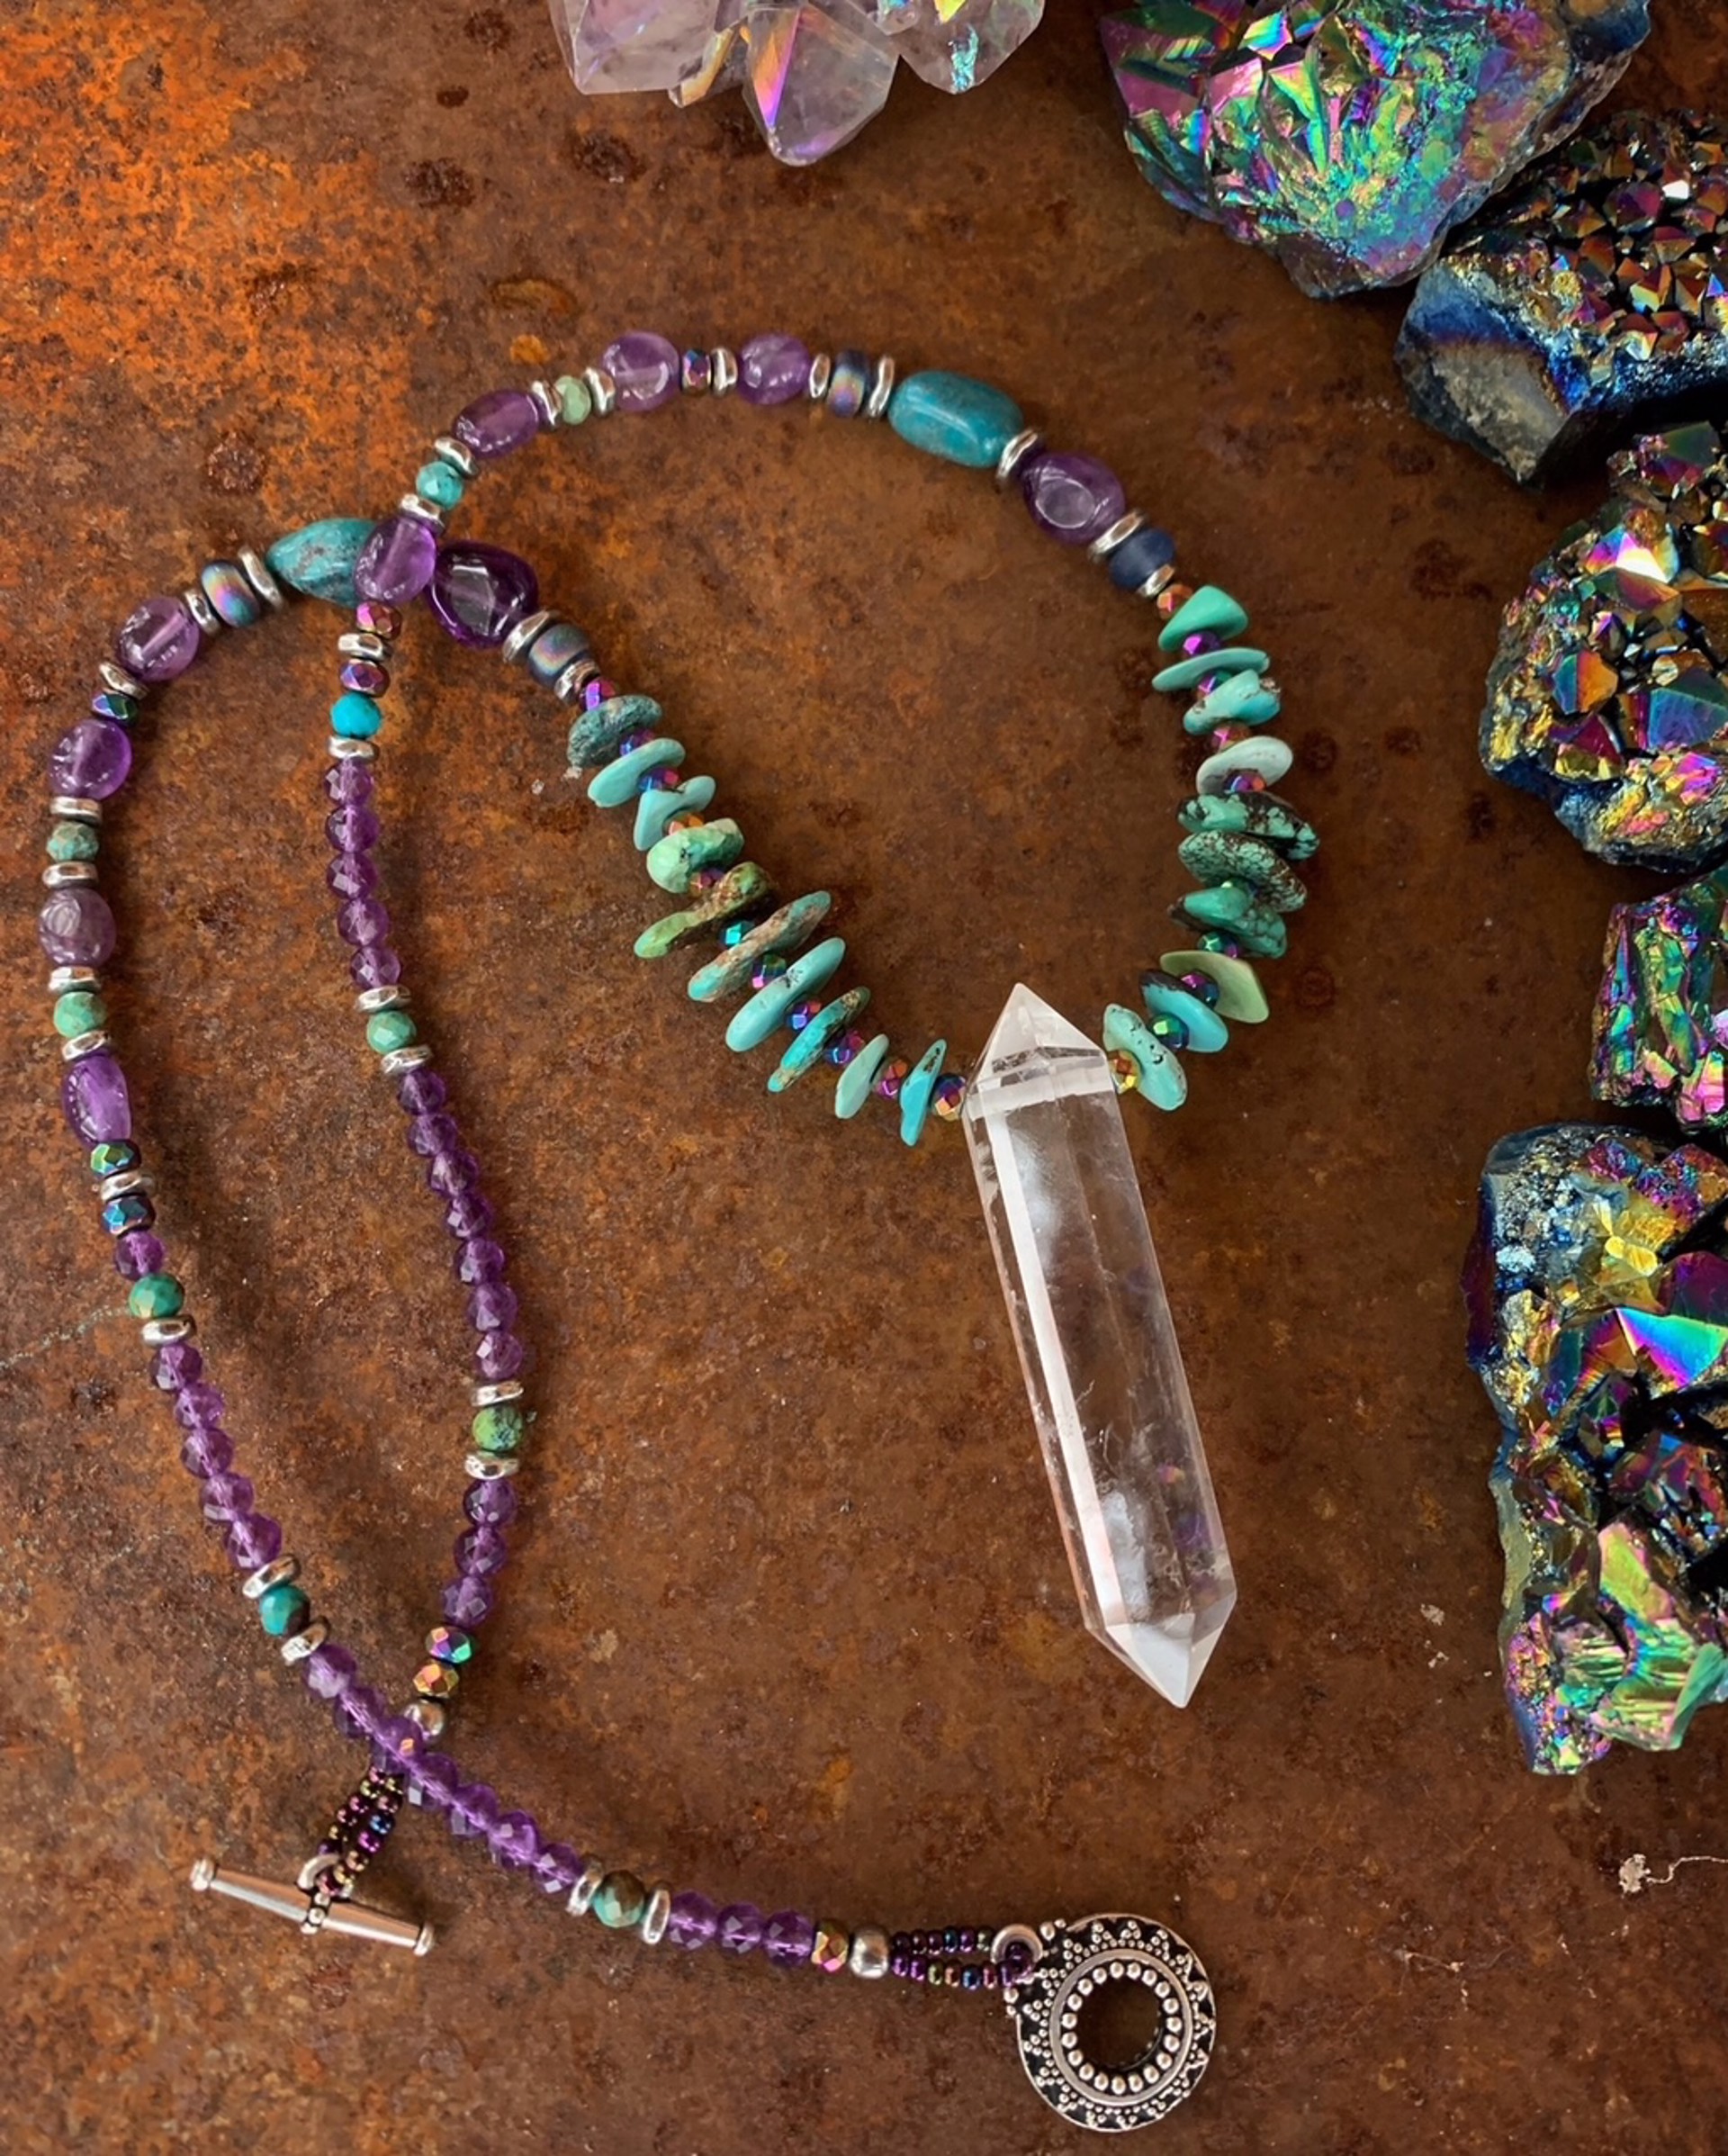 K783 Turquoise Amethyst and Crystal Necklace by Kelly Ormsby